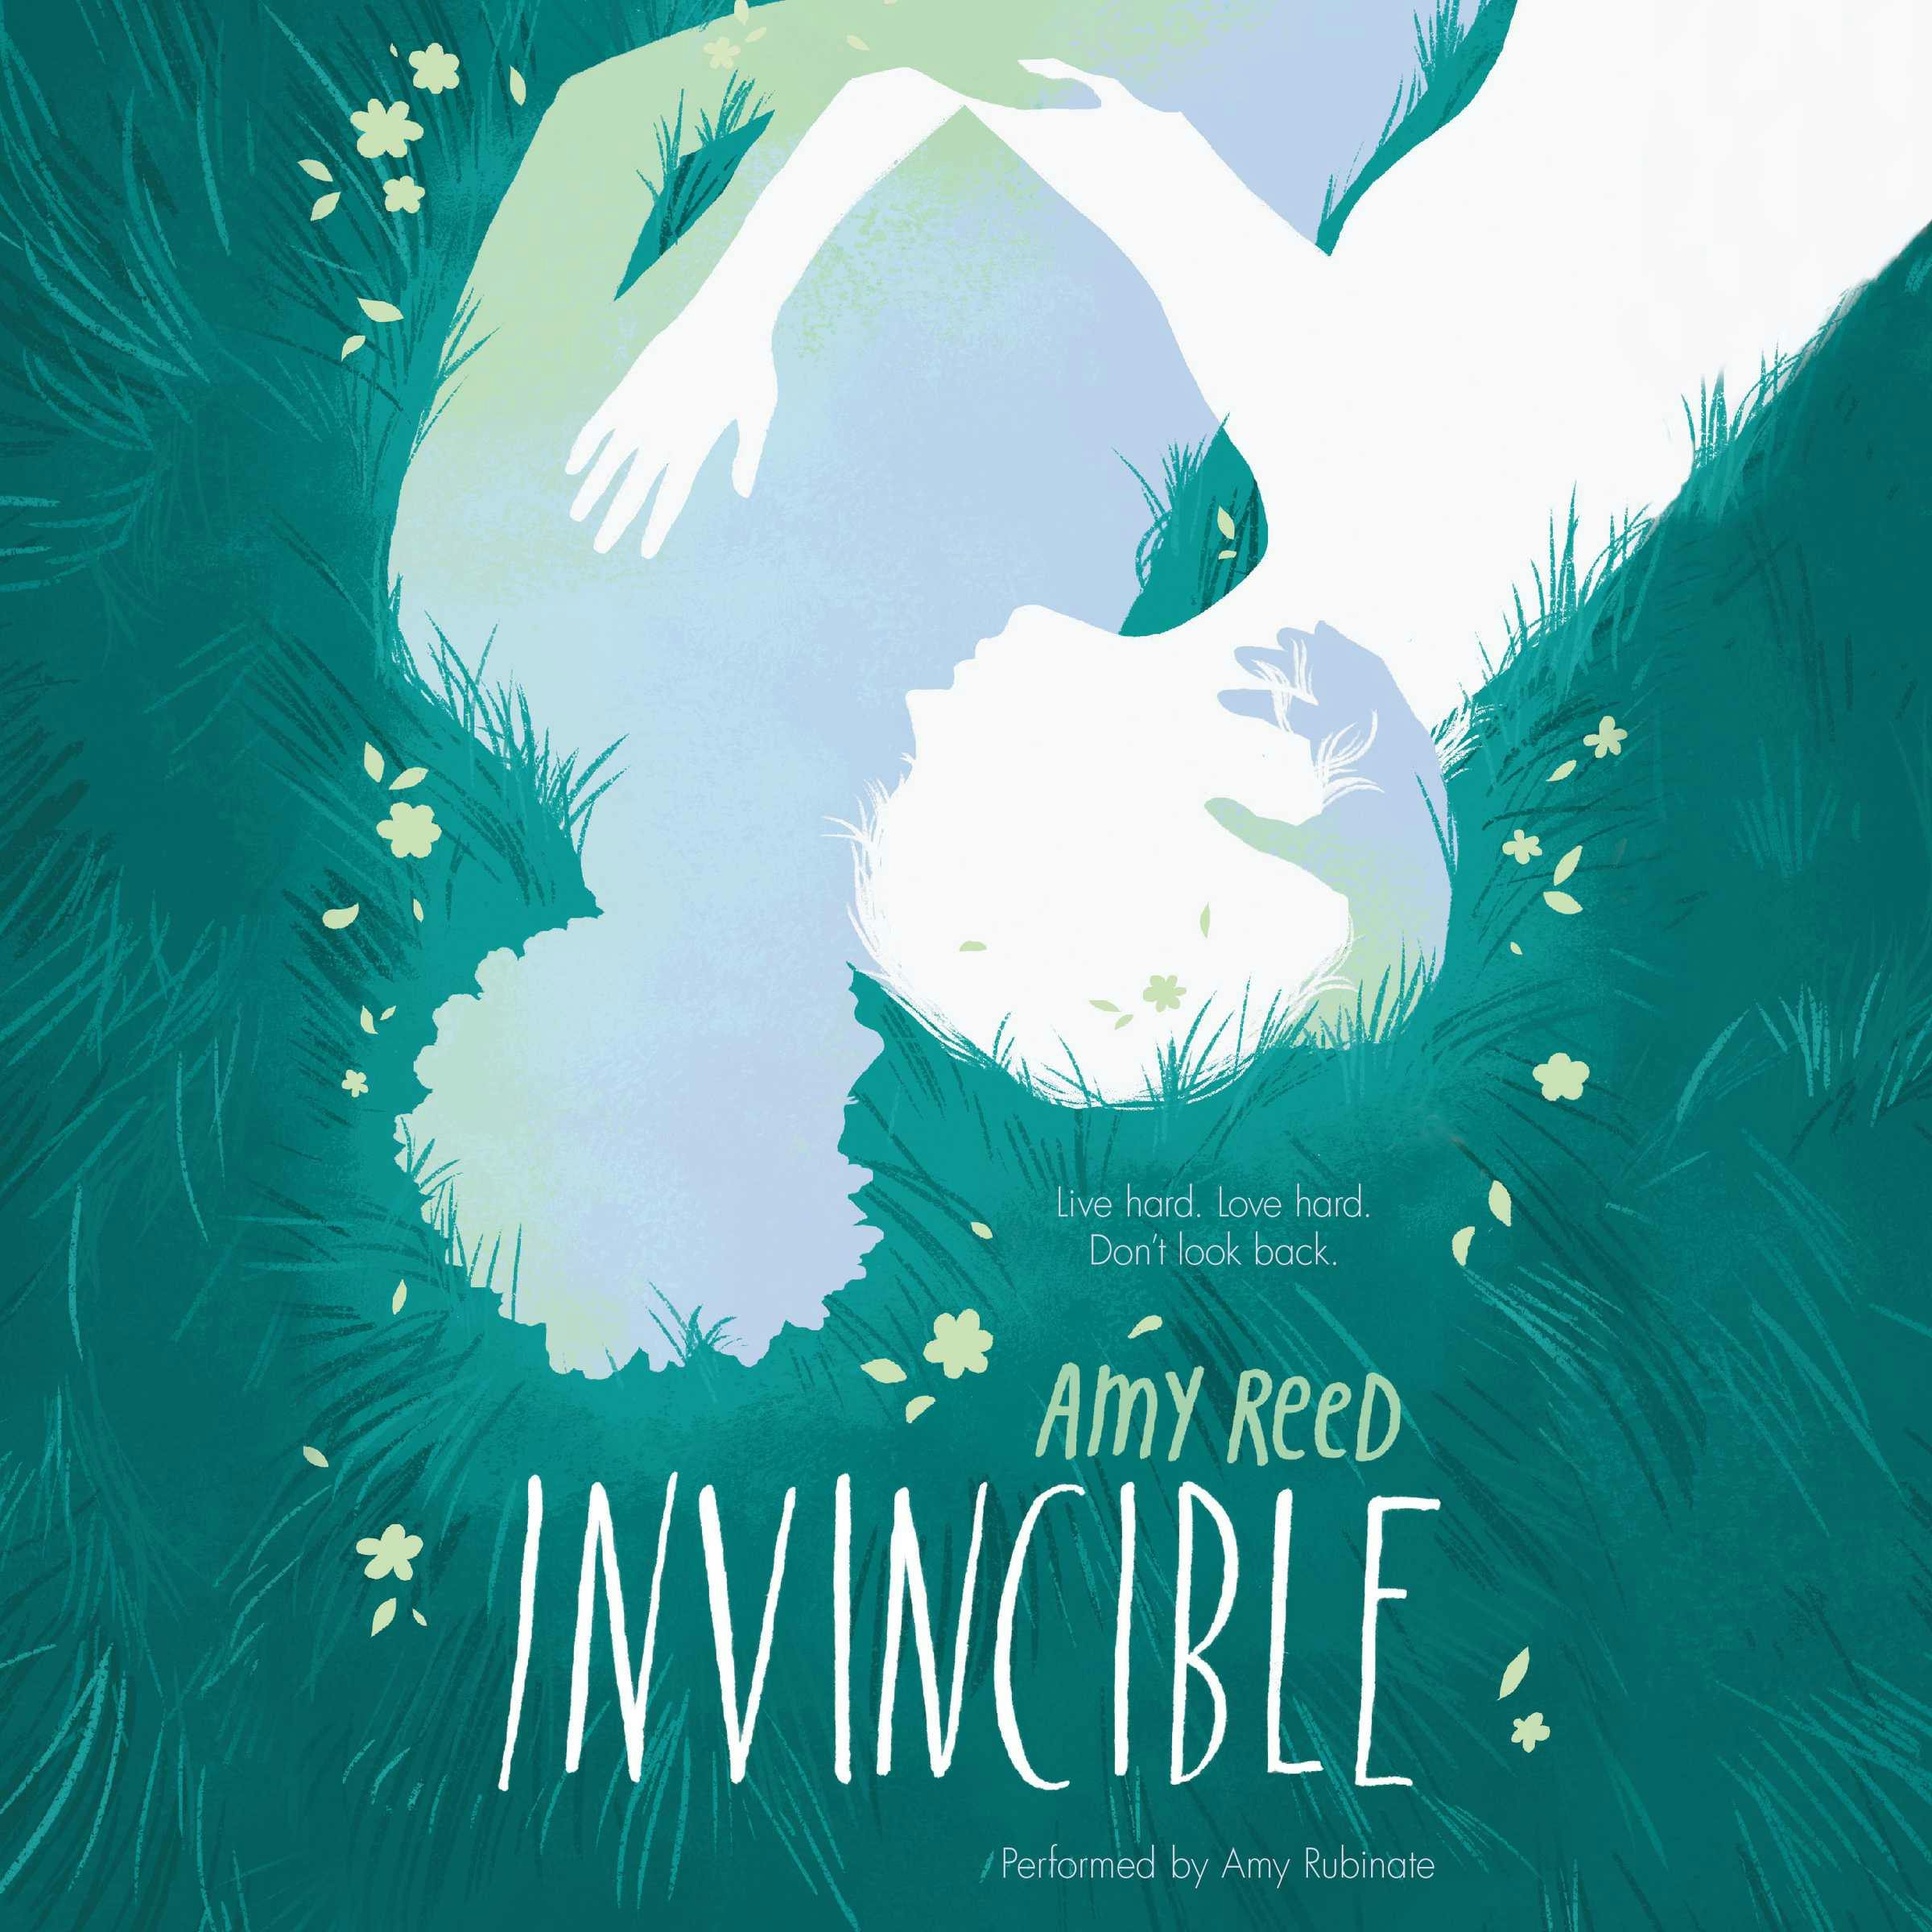 Invincible - Amy Reed